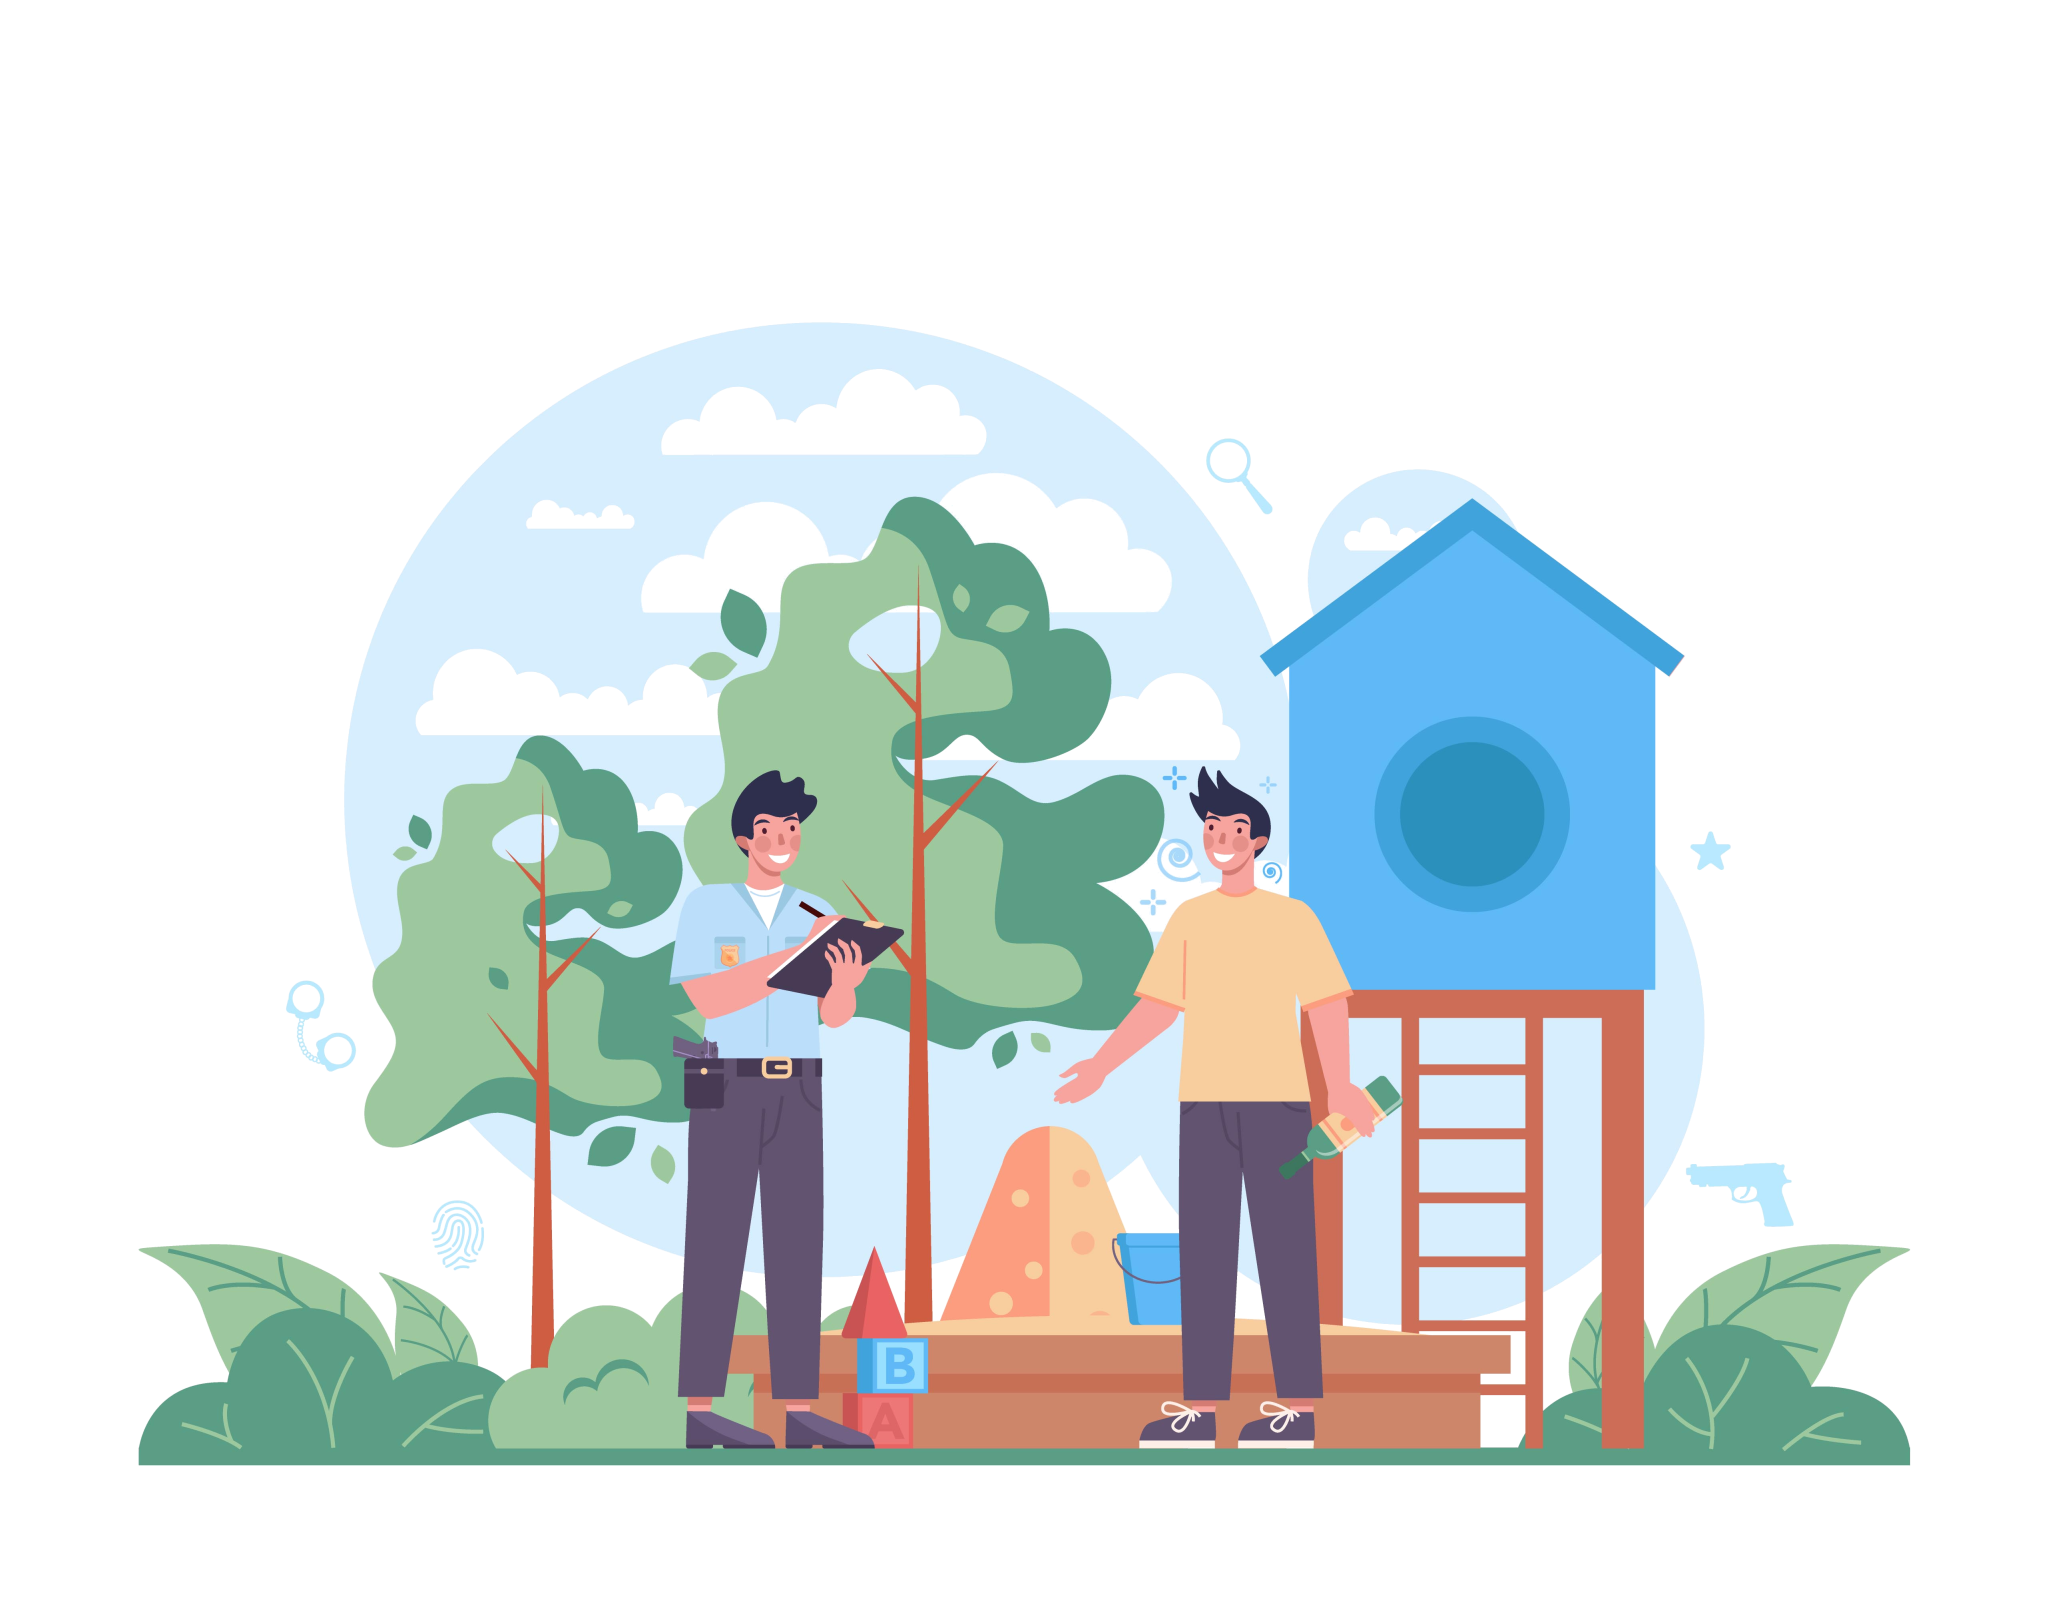 Graphic illustration of two people outdoors